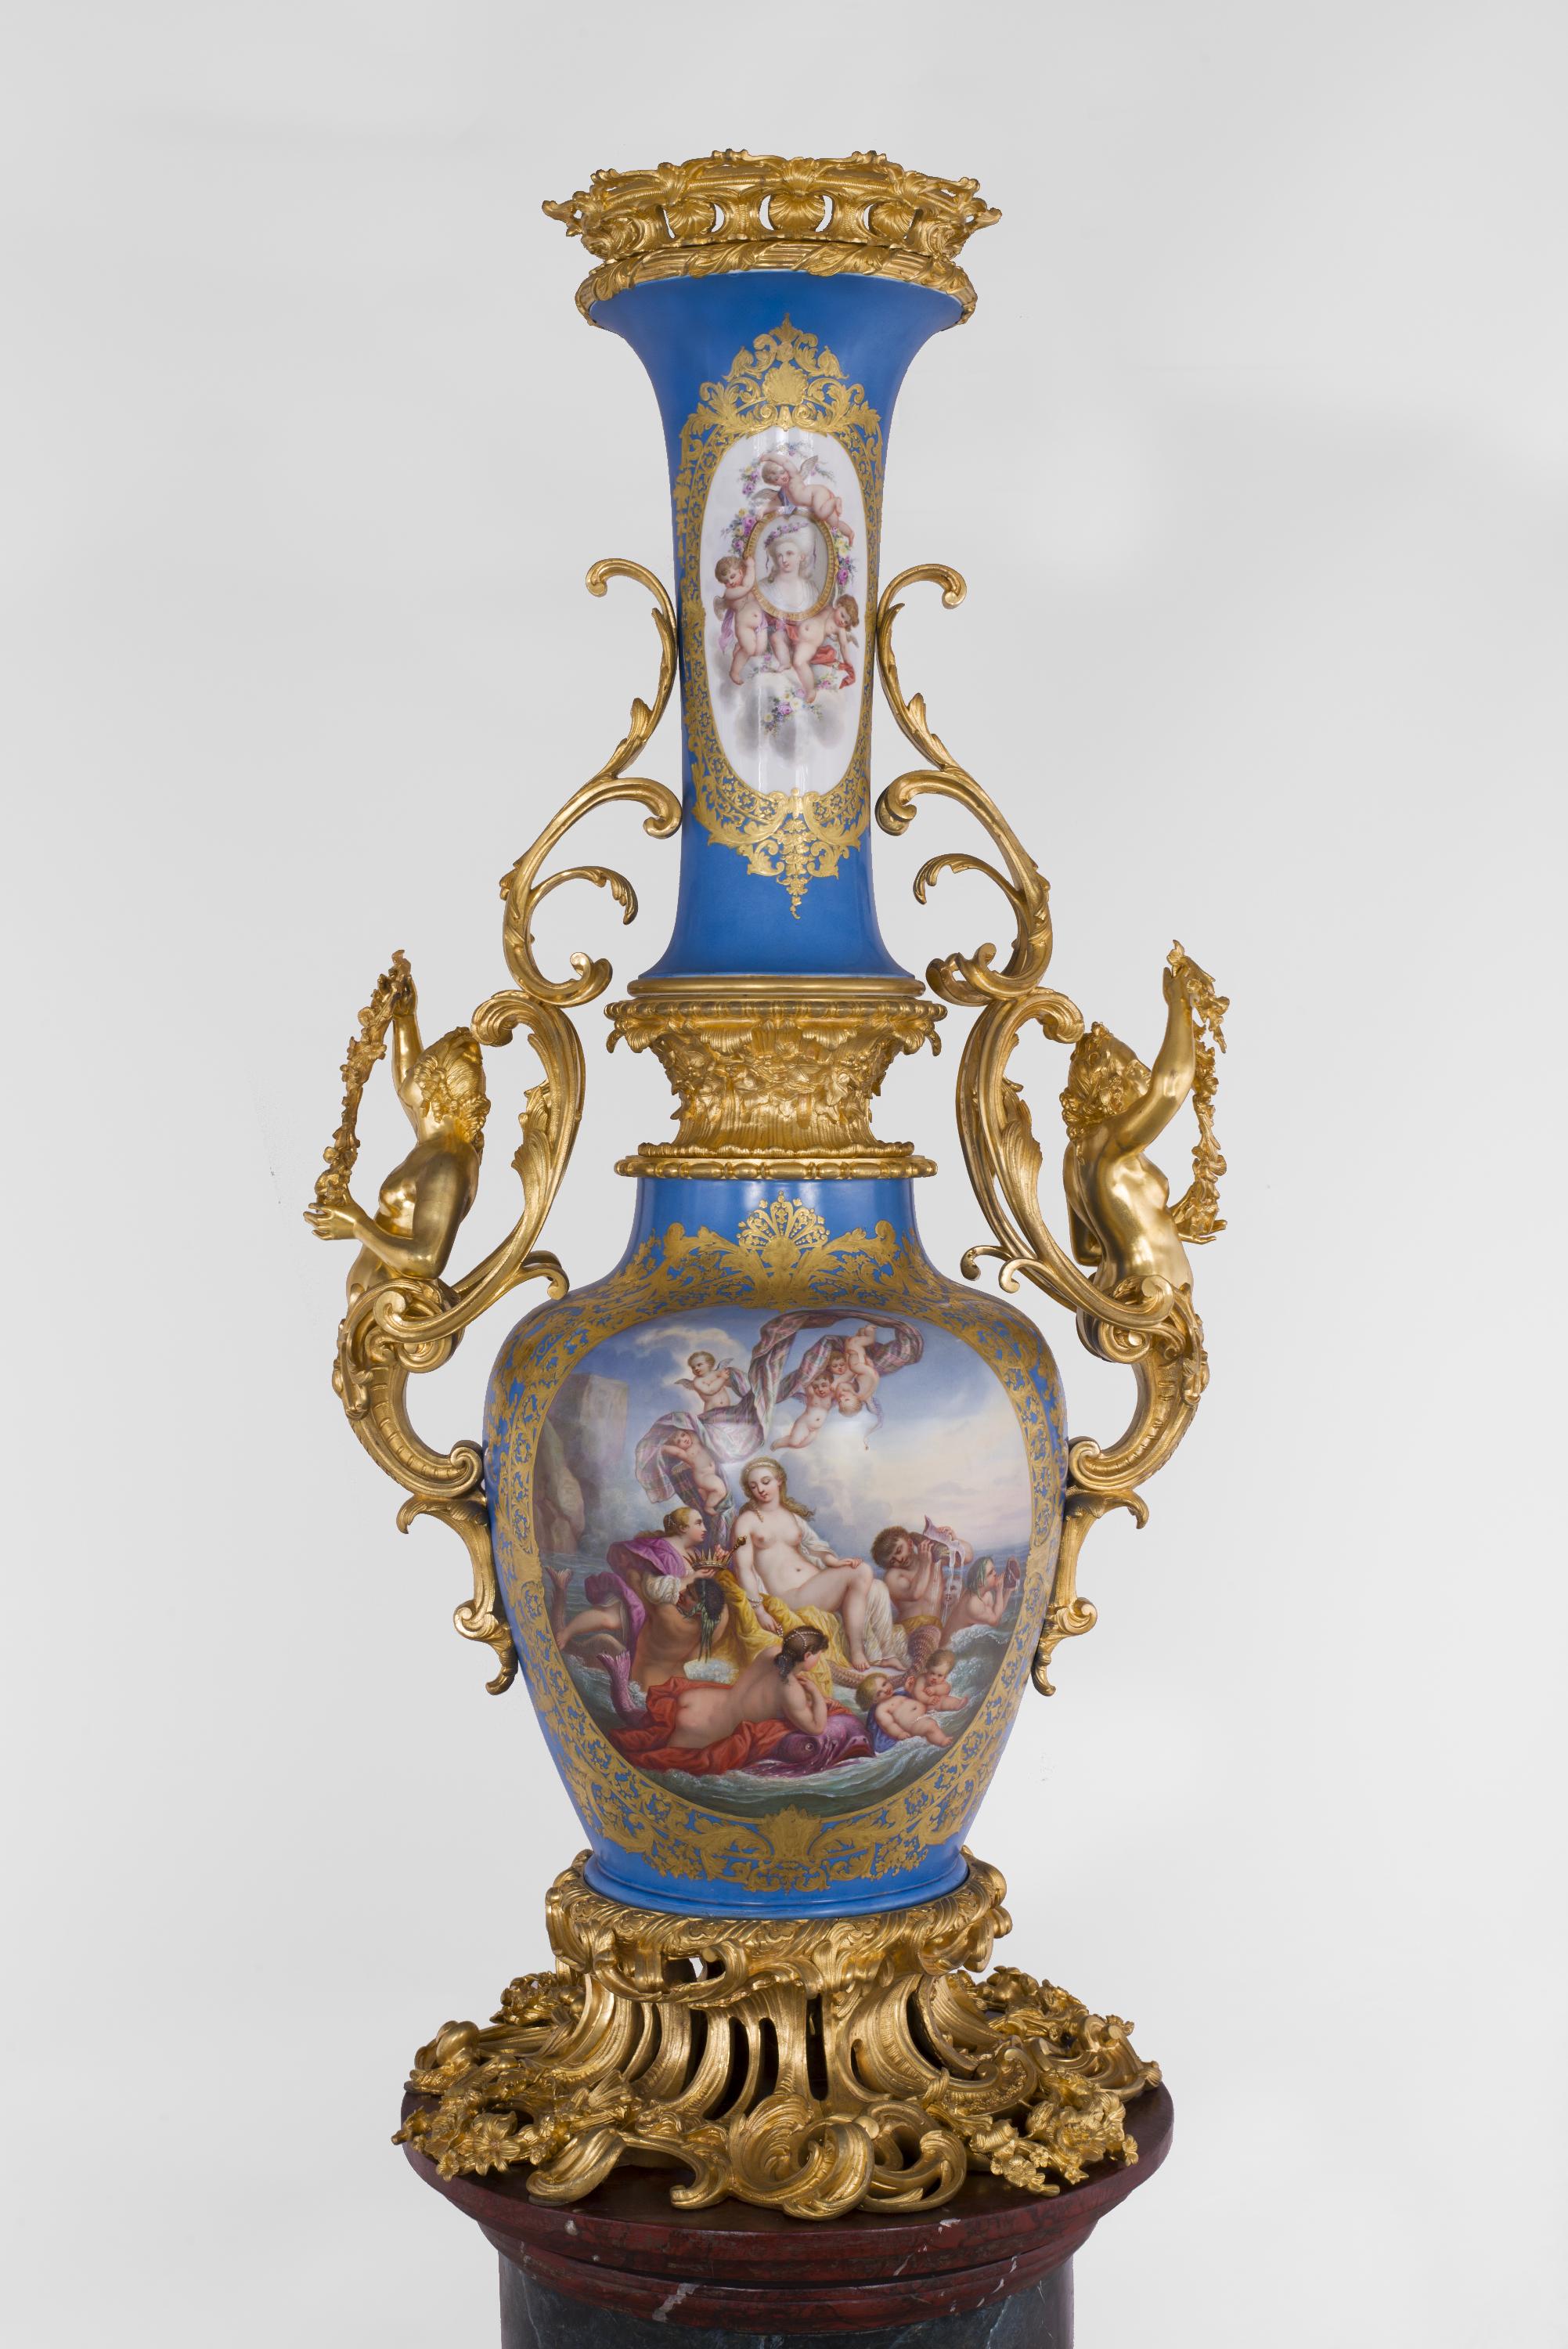 This exceptional monumental vase in porcelain of Paris, conceived in the spirit of the Sèvres Manufactory’s productions, is quite characteristic of the Napoleon III style . The long neck of the shape is extremely rare, as well as the gilt bronzes’